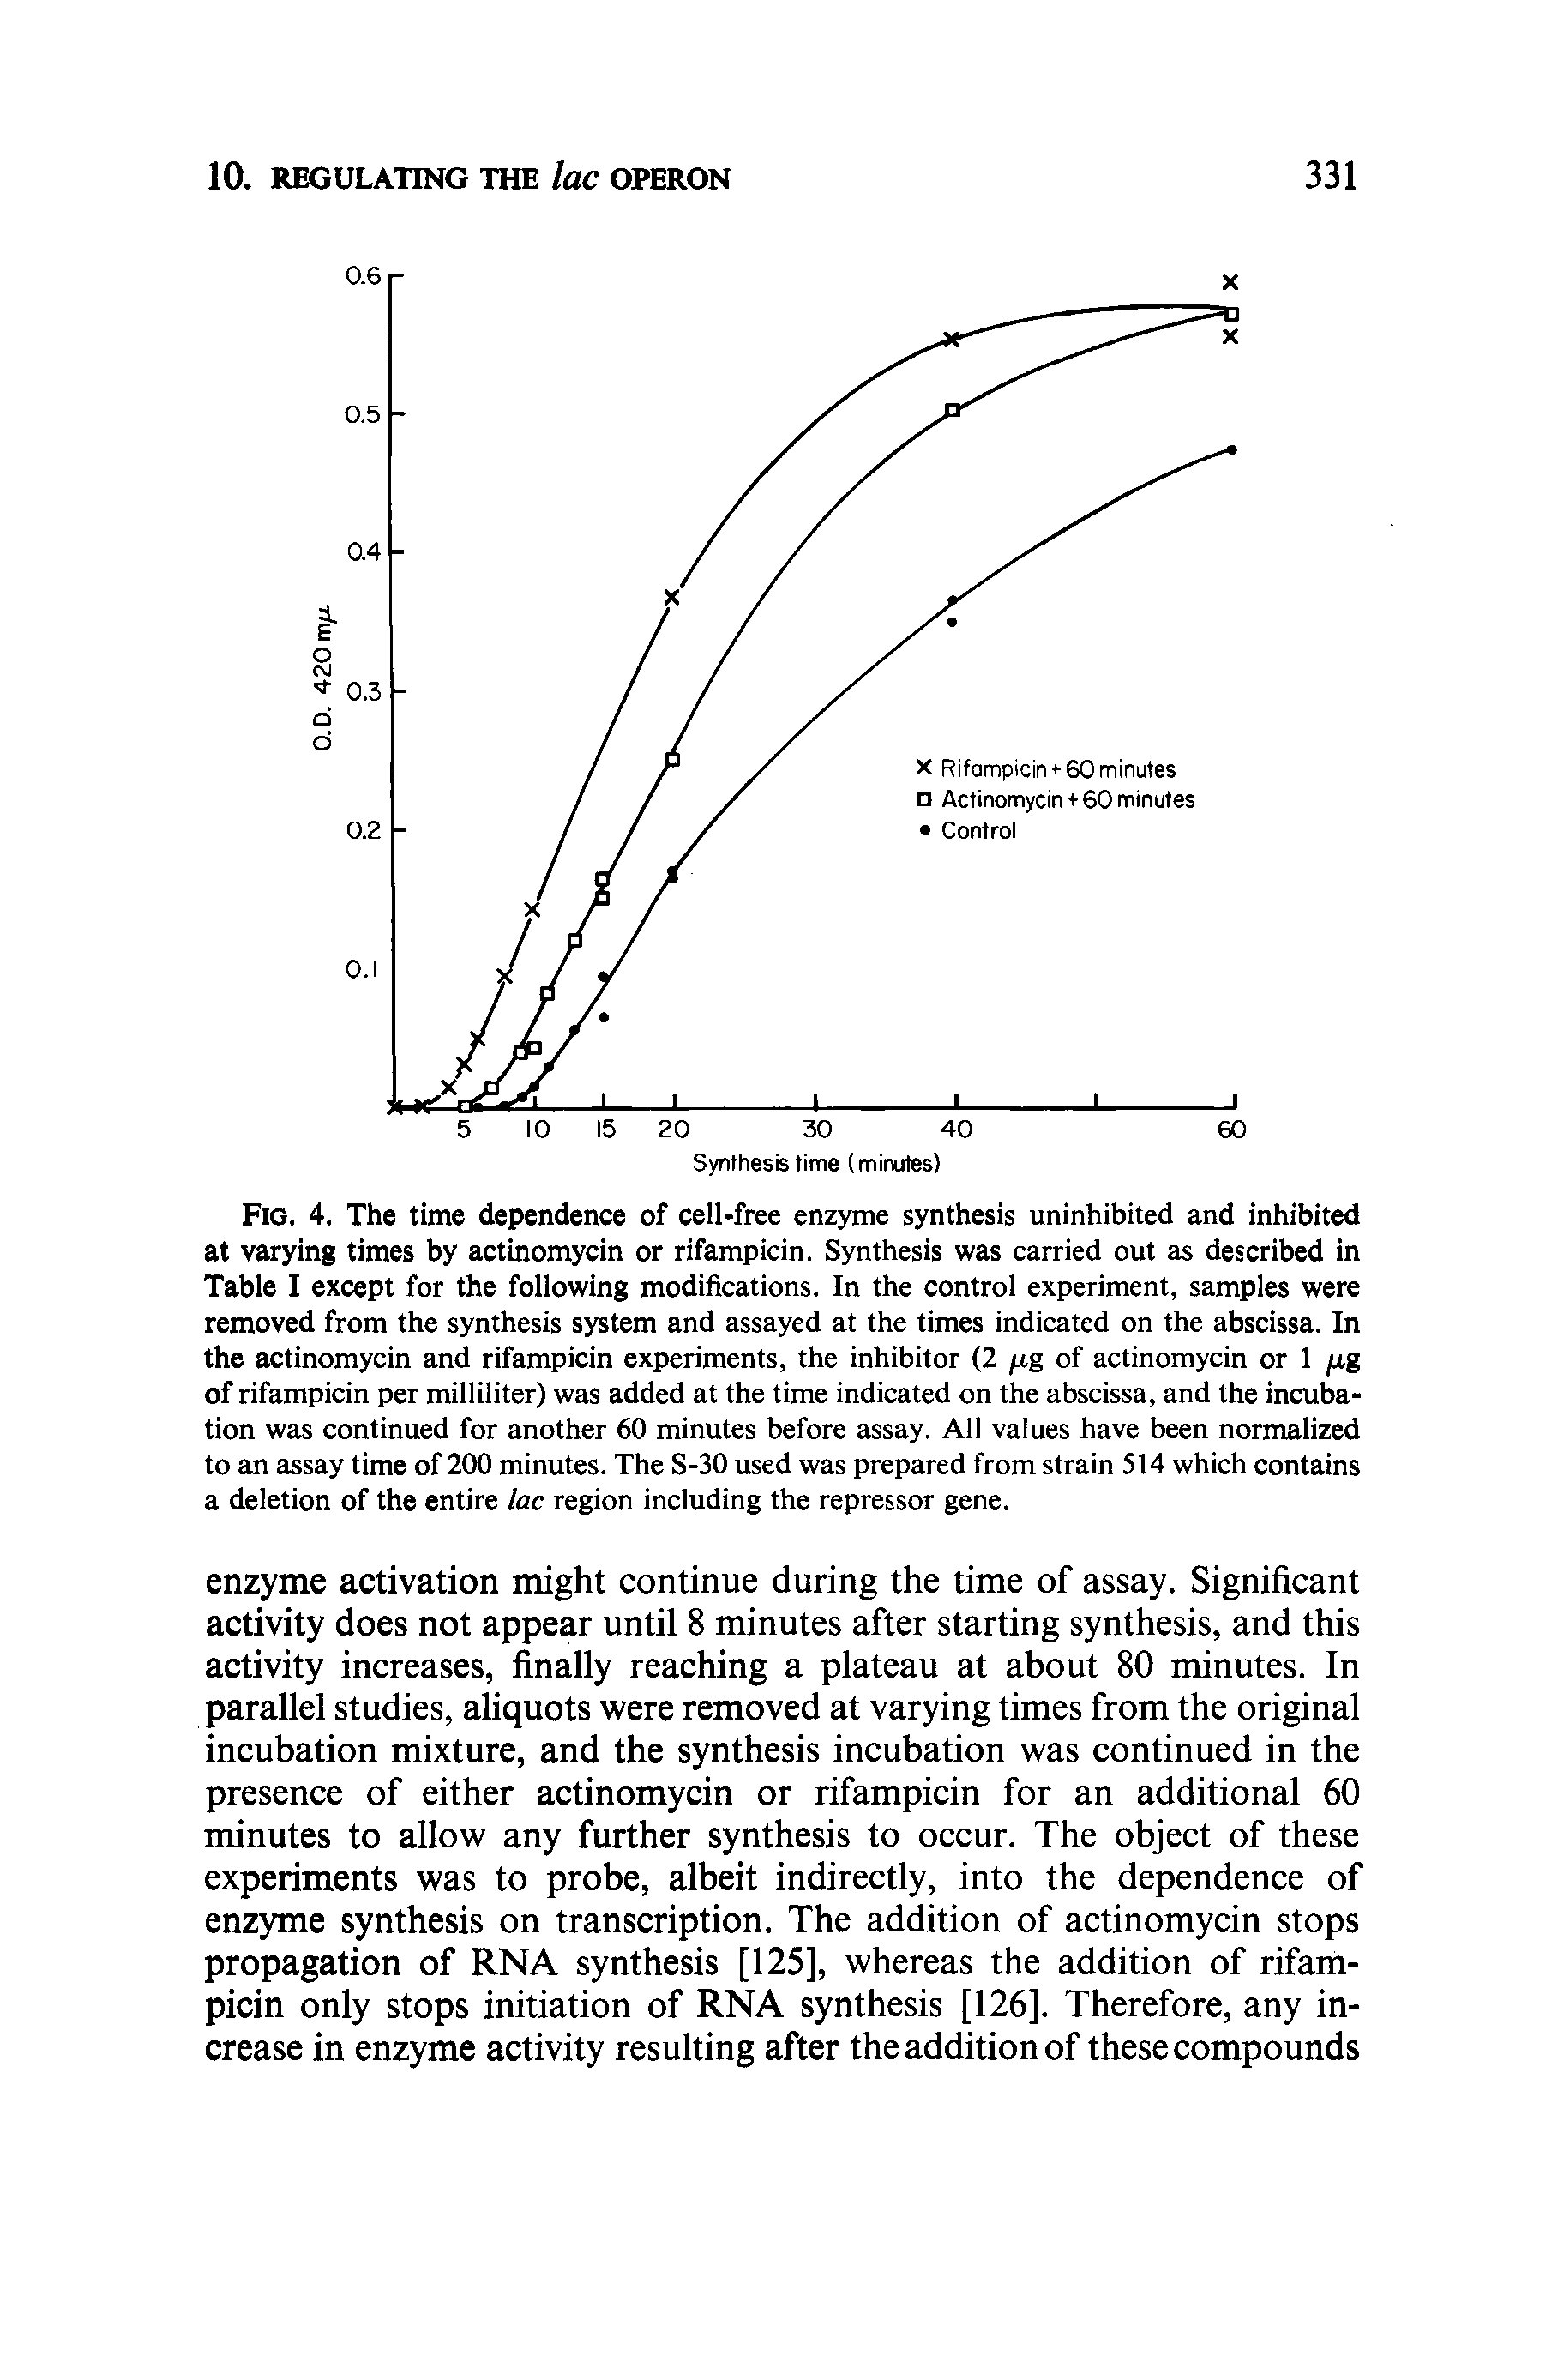 Fig. 4. The time dependence of cell-free enzyme synthesis uninhibited and inhibited at varying times by actinomycin or rifampicin. Synthesis was carried out as described in Table 1 except for the following modifications. In the control experiment, samples were removed from the synthesis system and assayed at the times indicated on the abscissa. In the actinomycin and rifampicin experiments, the inhibitor (2 jitg of actinomycin or 1 ju,g of rifampicin per milliliter) was added at the time indicated on the abscissa, and the incubation was continued for another 60 minutes before assay. All values have been normalized to an assay time of 200 minutes. The S-30 used was prepared from strain 514 which contains a deletion of the entire lac region including the repressor gene.